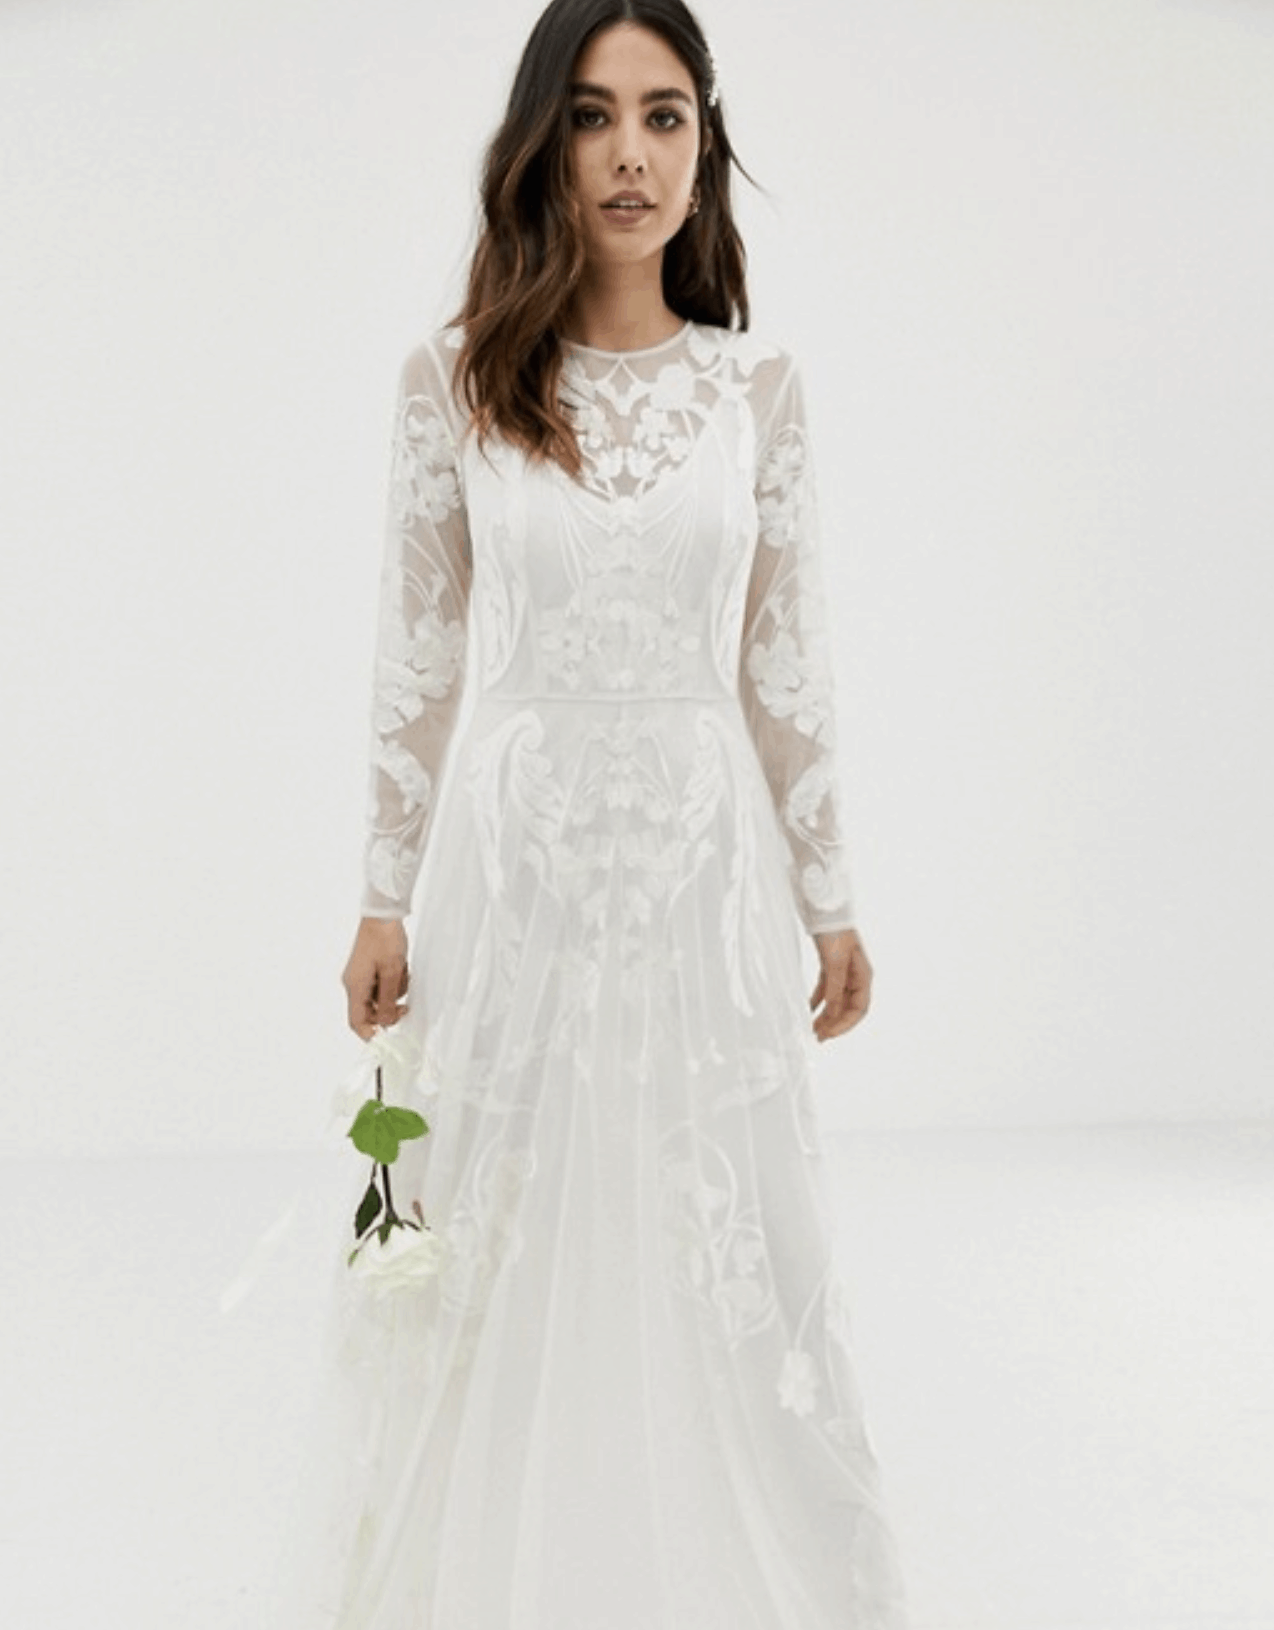 Wedding Dresses and Bridal Gowns from ASOS